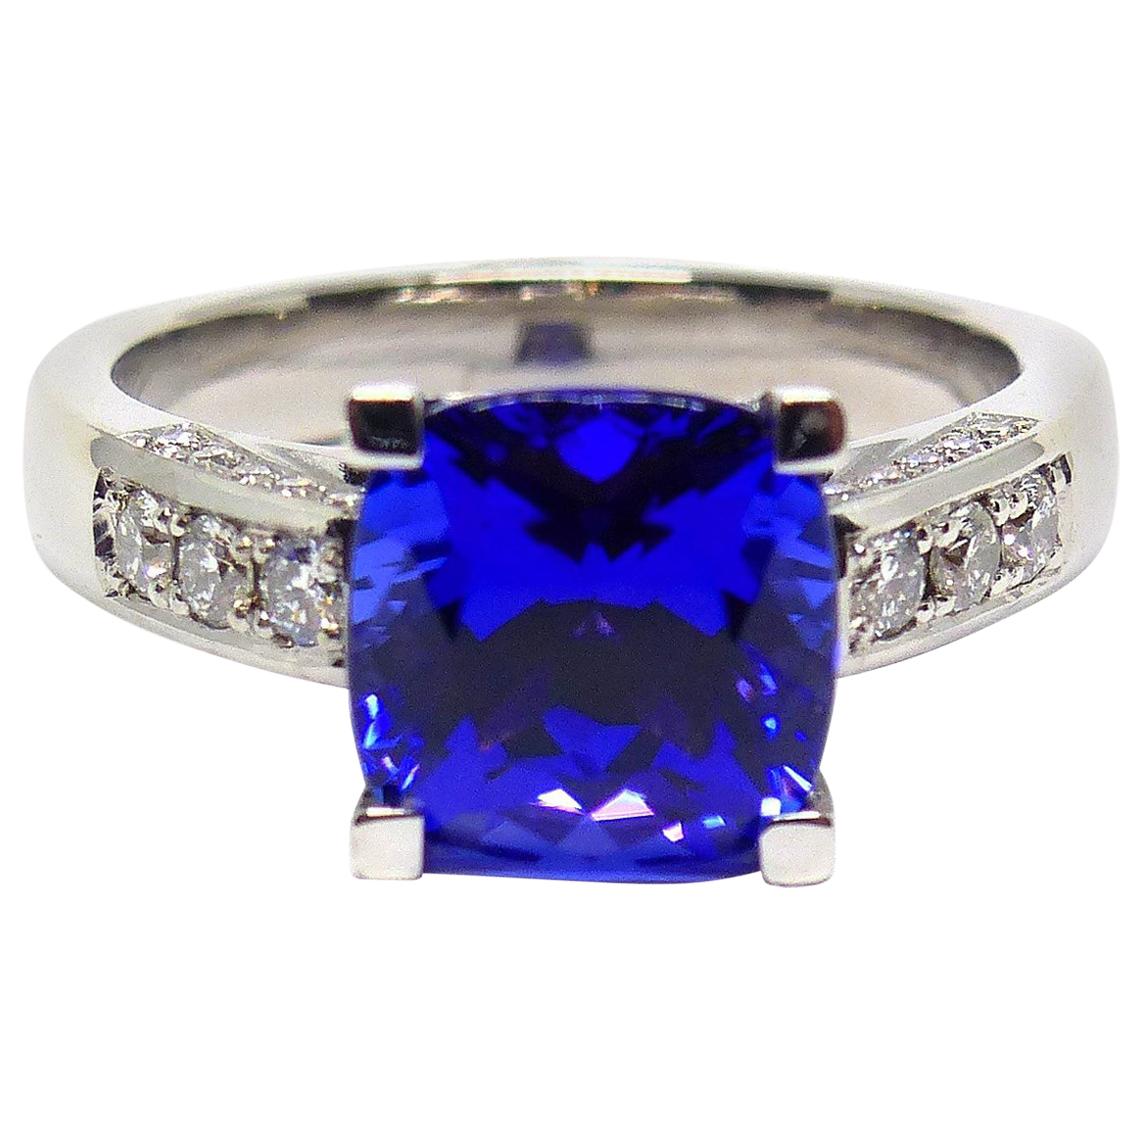 Ring in White Gold with 1 Tanzanite Cushion shape and Diamonds.